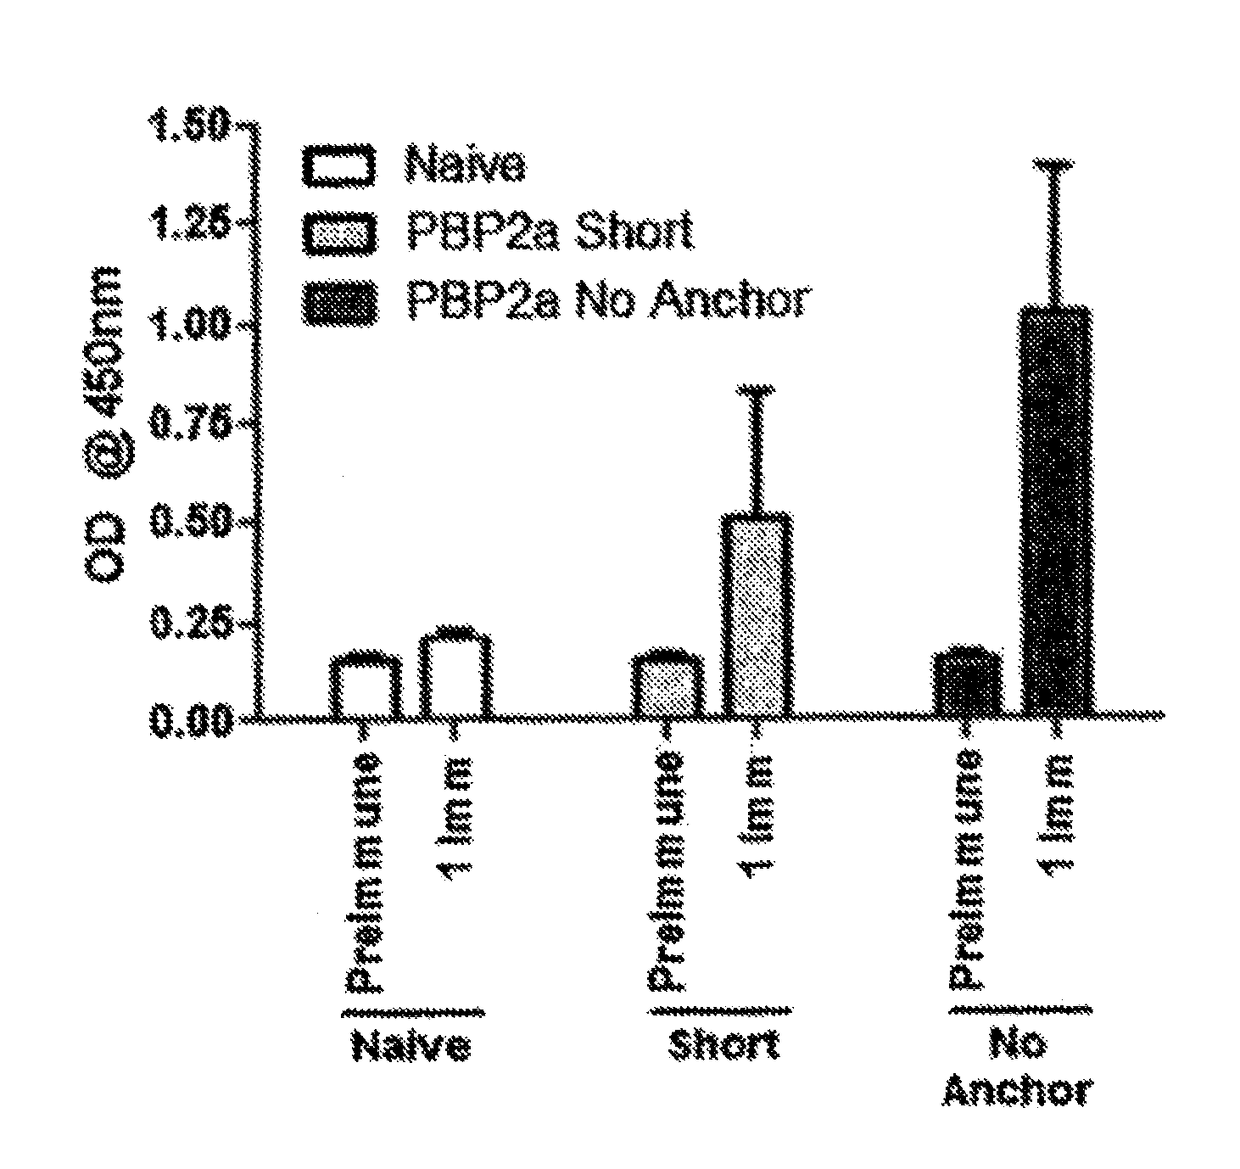 Proteins comprising MRSA PBP2a and fragments thereof, nucleic acids encoding the same, and compositions and their use to prevent and treat MRSA infections